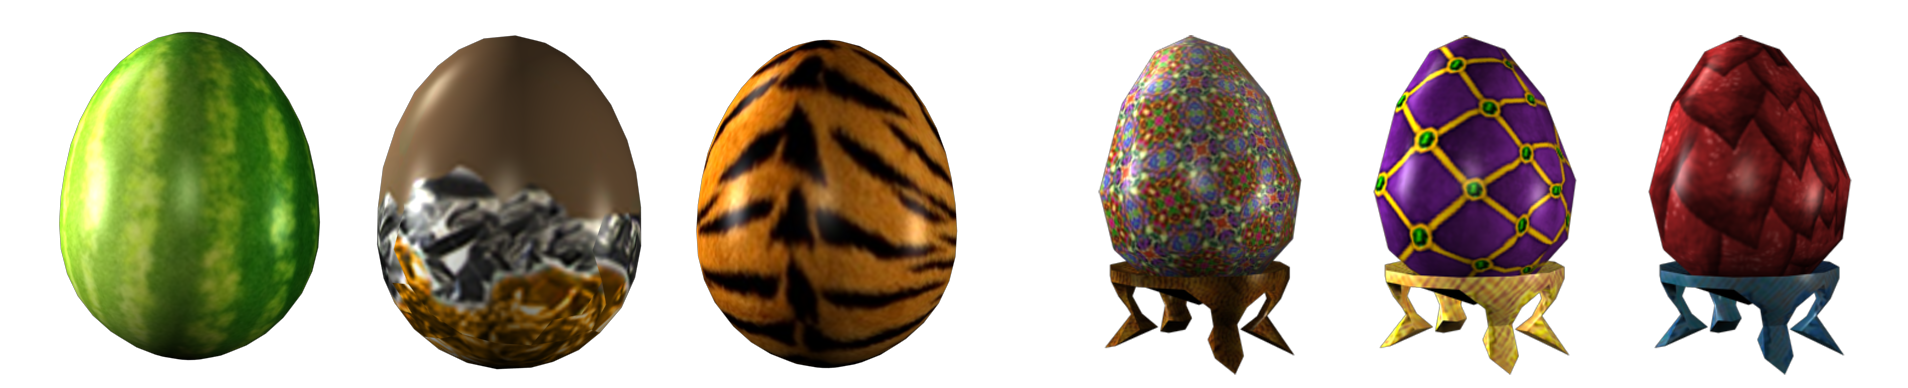 Presenting The Winners Of The Egg And Face Design Contests Roblox Blog - robux egg